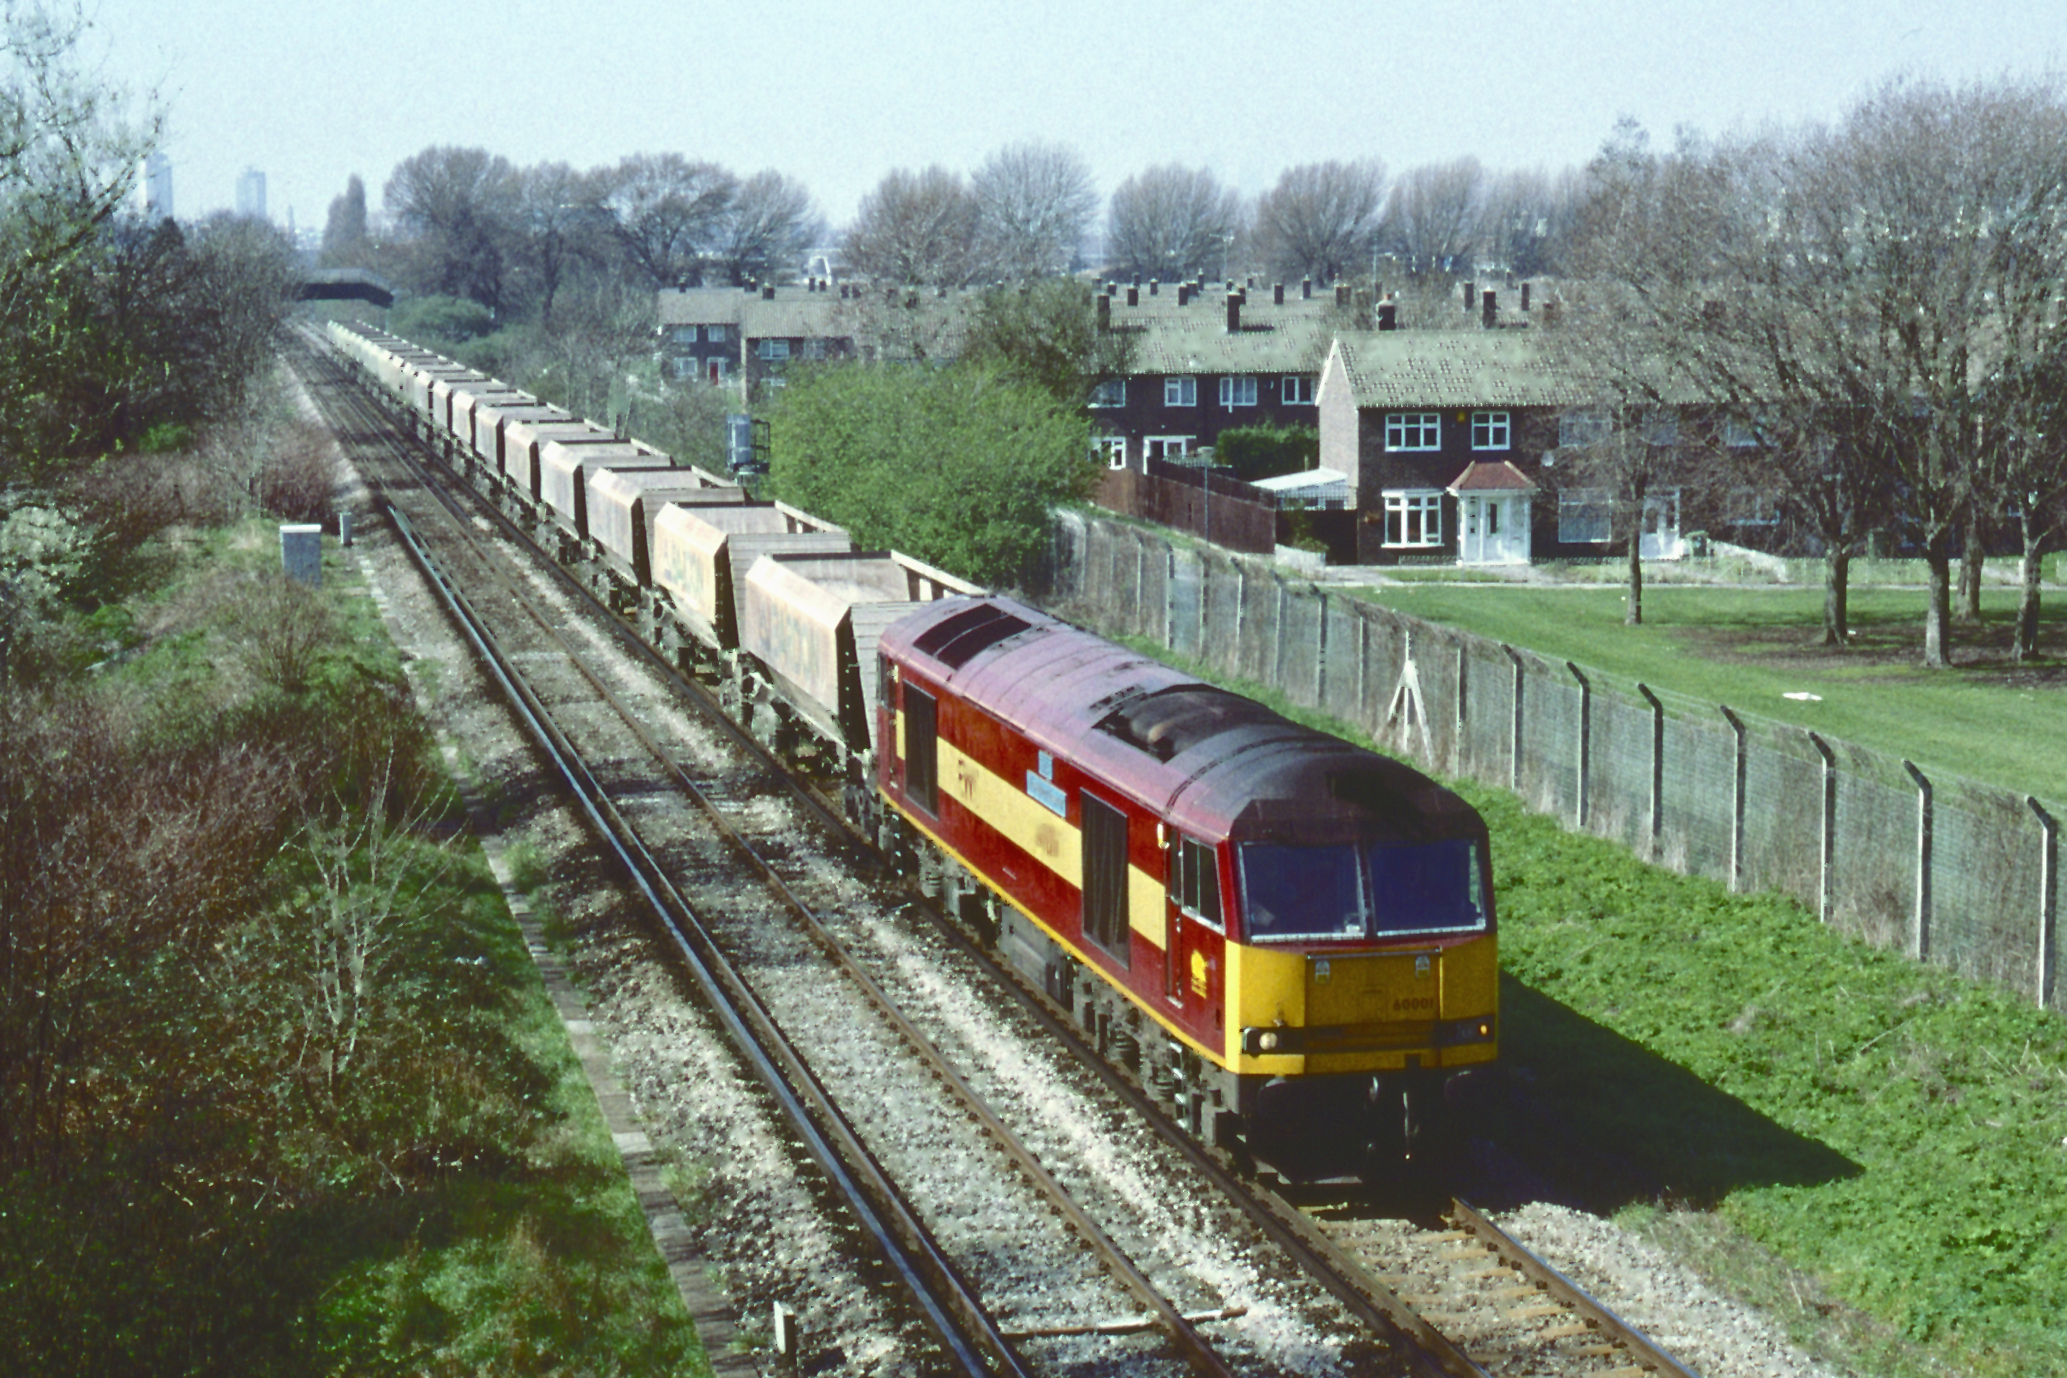 60001 passes Abbey Wood station on 31st March 2004 with the Tolworth to Cliffe empty stone hoppers. David Clark, courtesy Rodney Lissenden